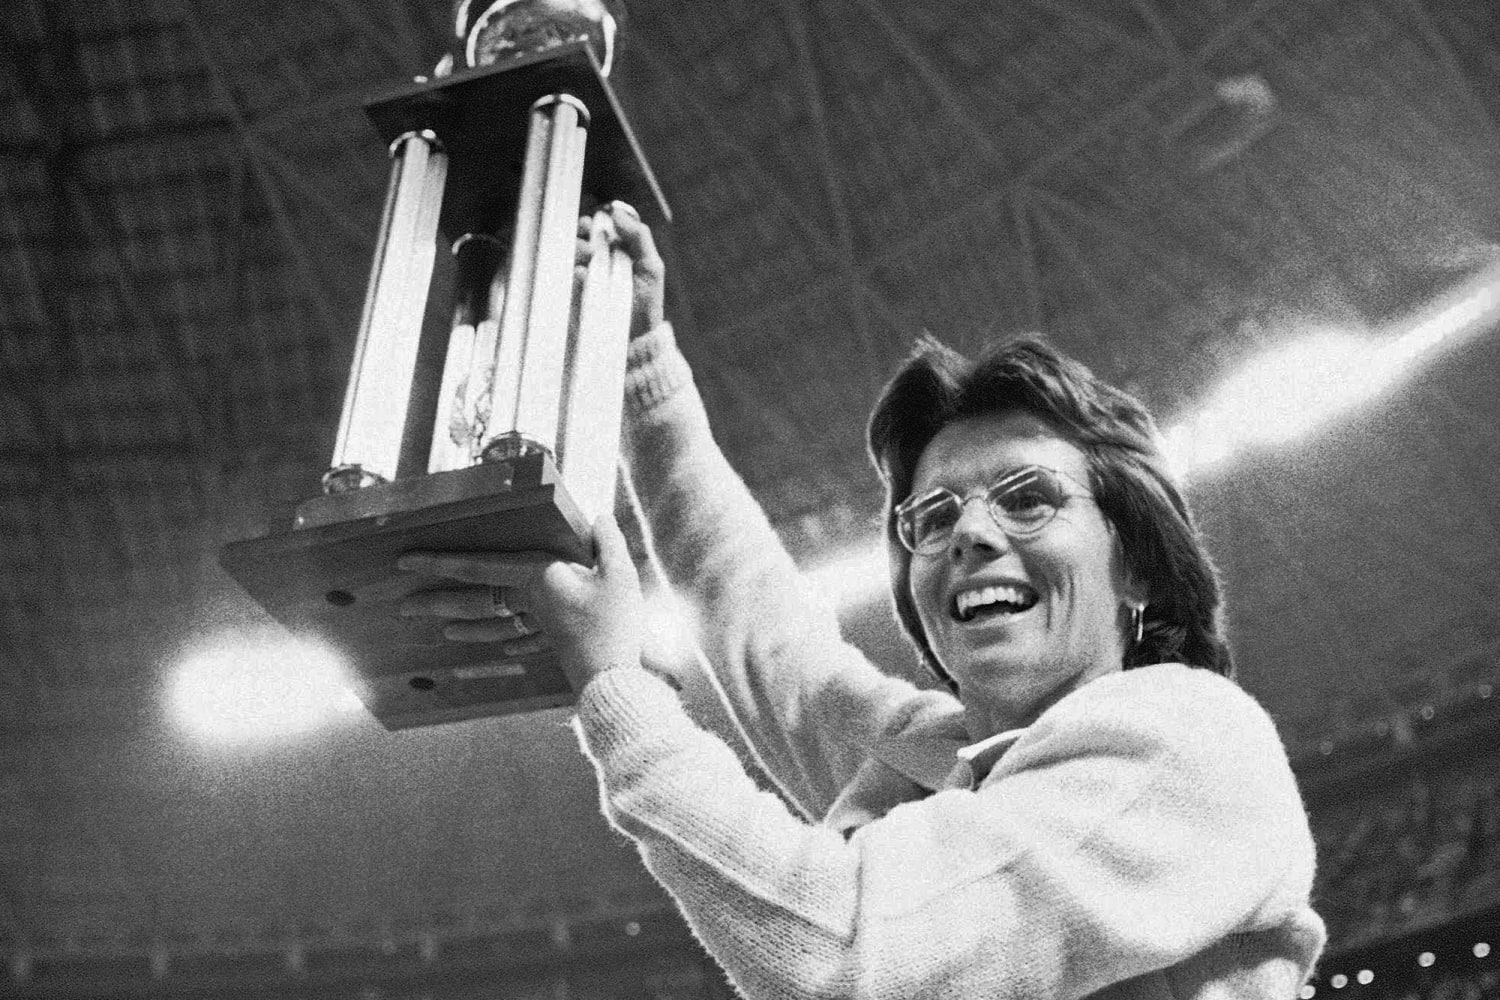 Life Story: Billie Jean King - Women & the American Story